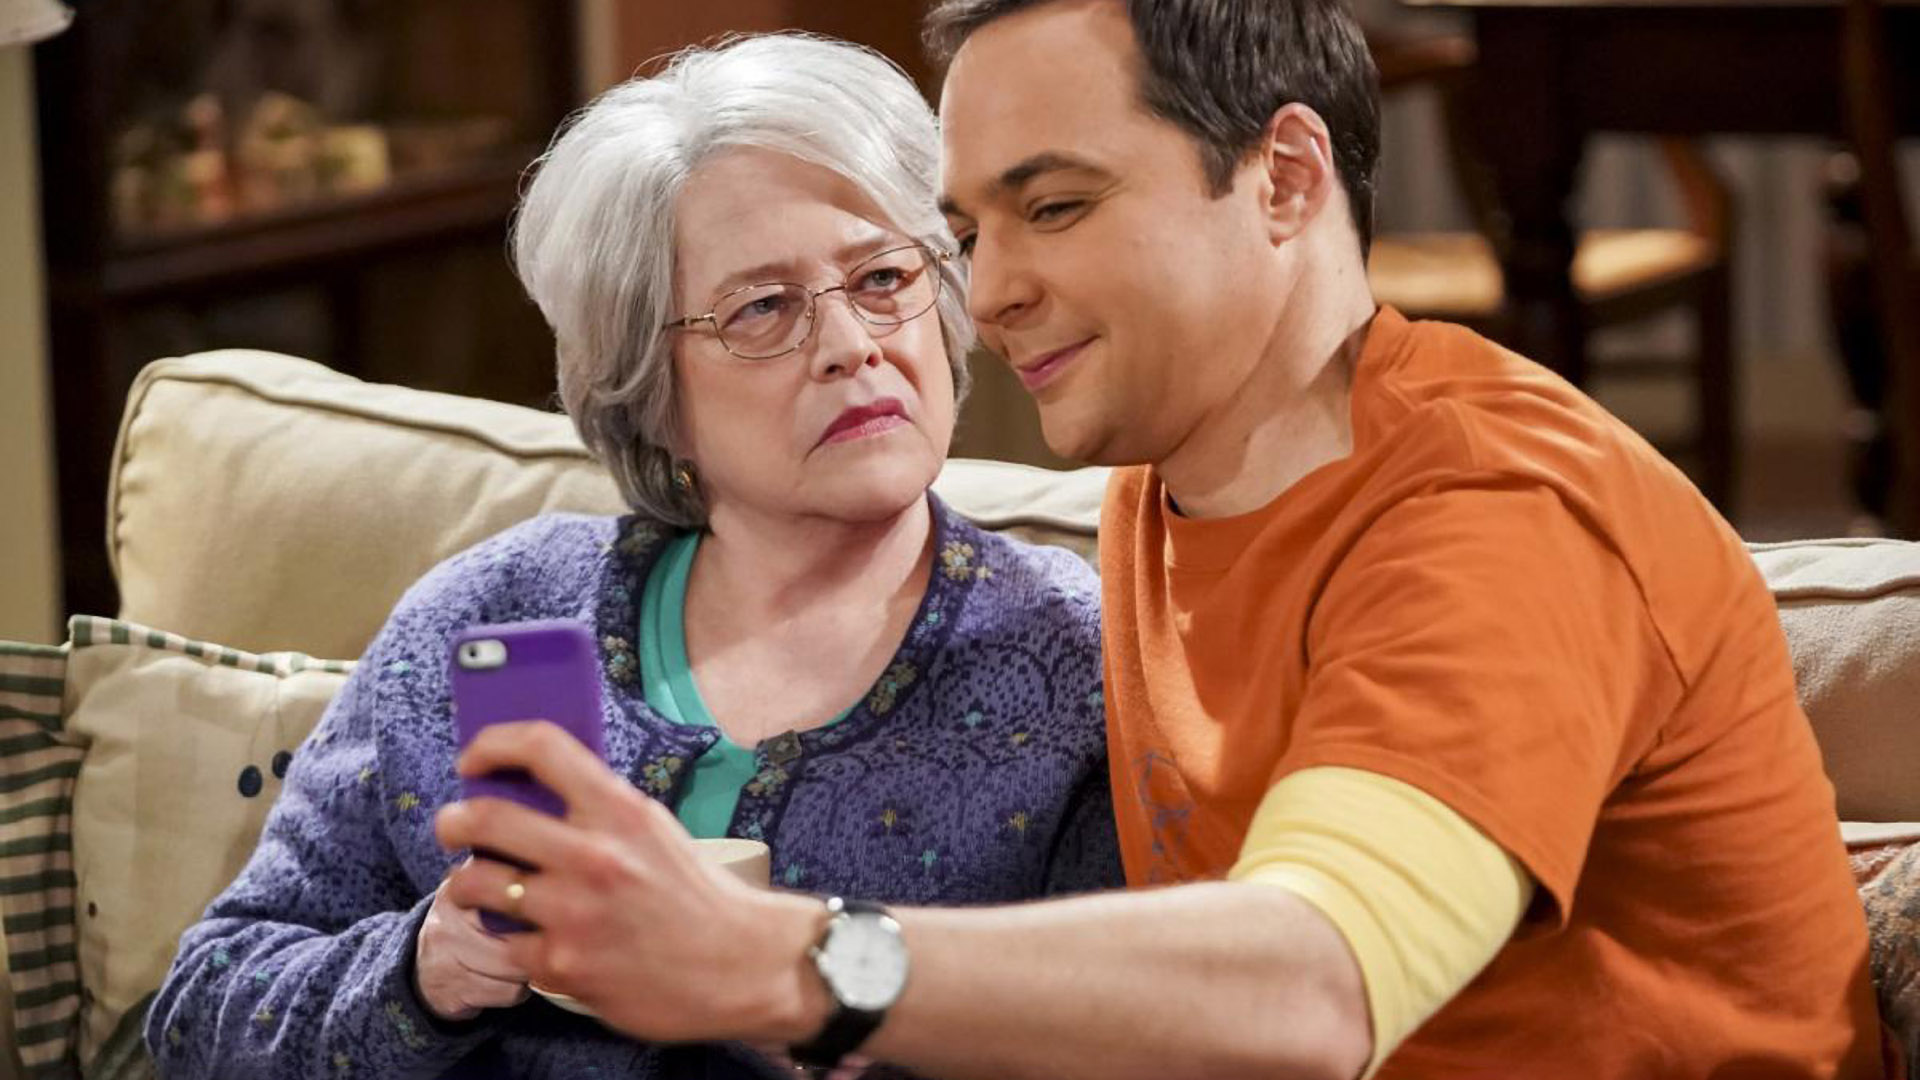 Amy's Mother Was Totally Different in TBBT, But Then Got Replaced